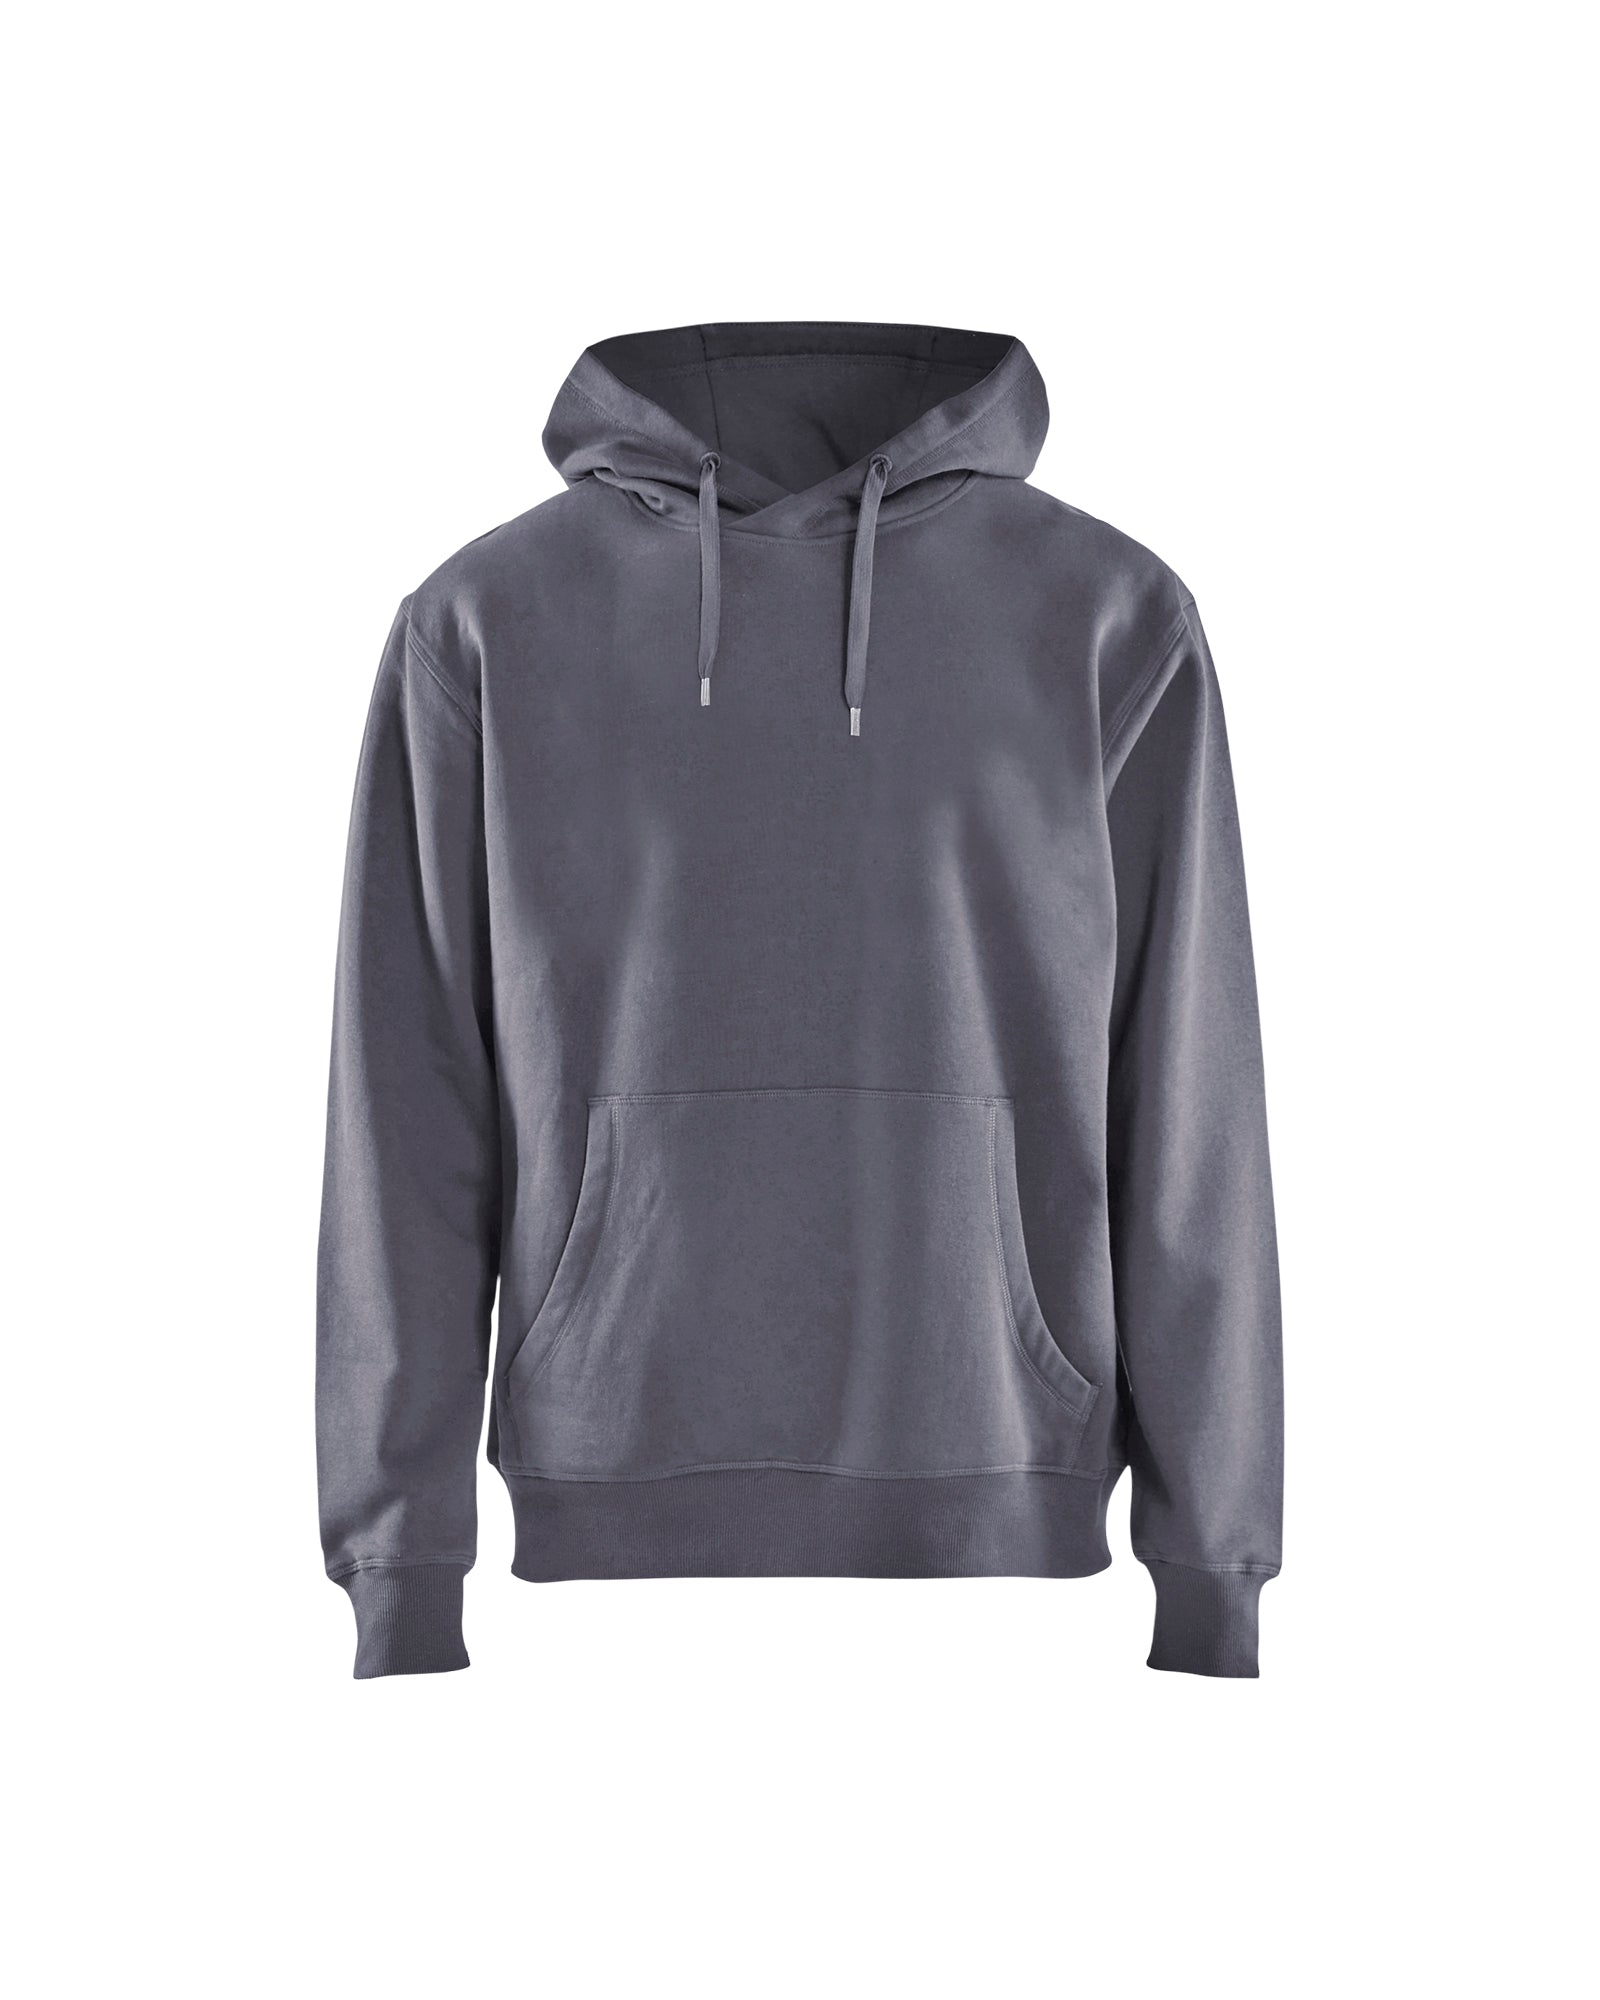 Men's Blaklader Hooded Sweatshirt in Grey Profile from the front